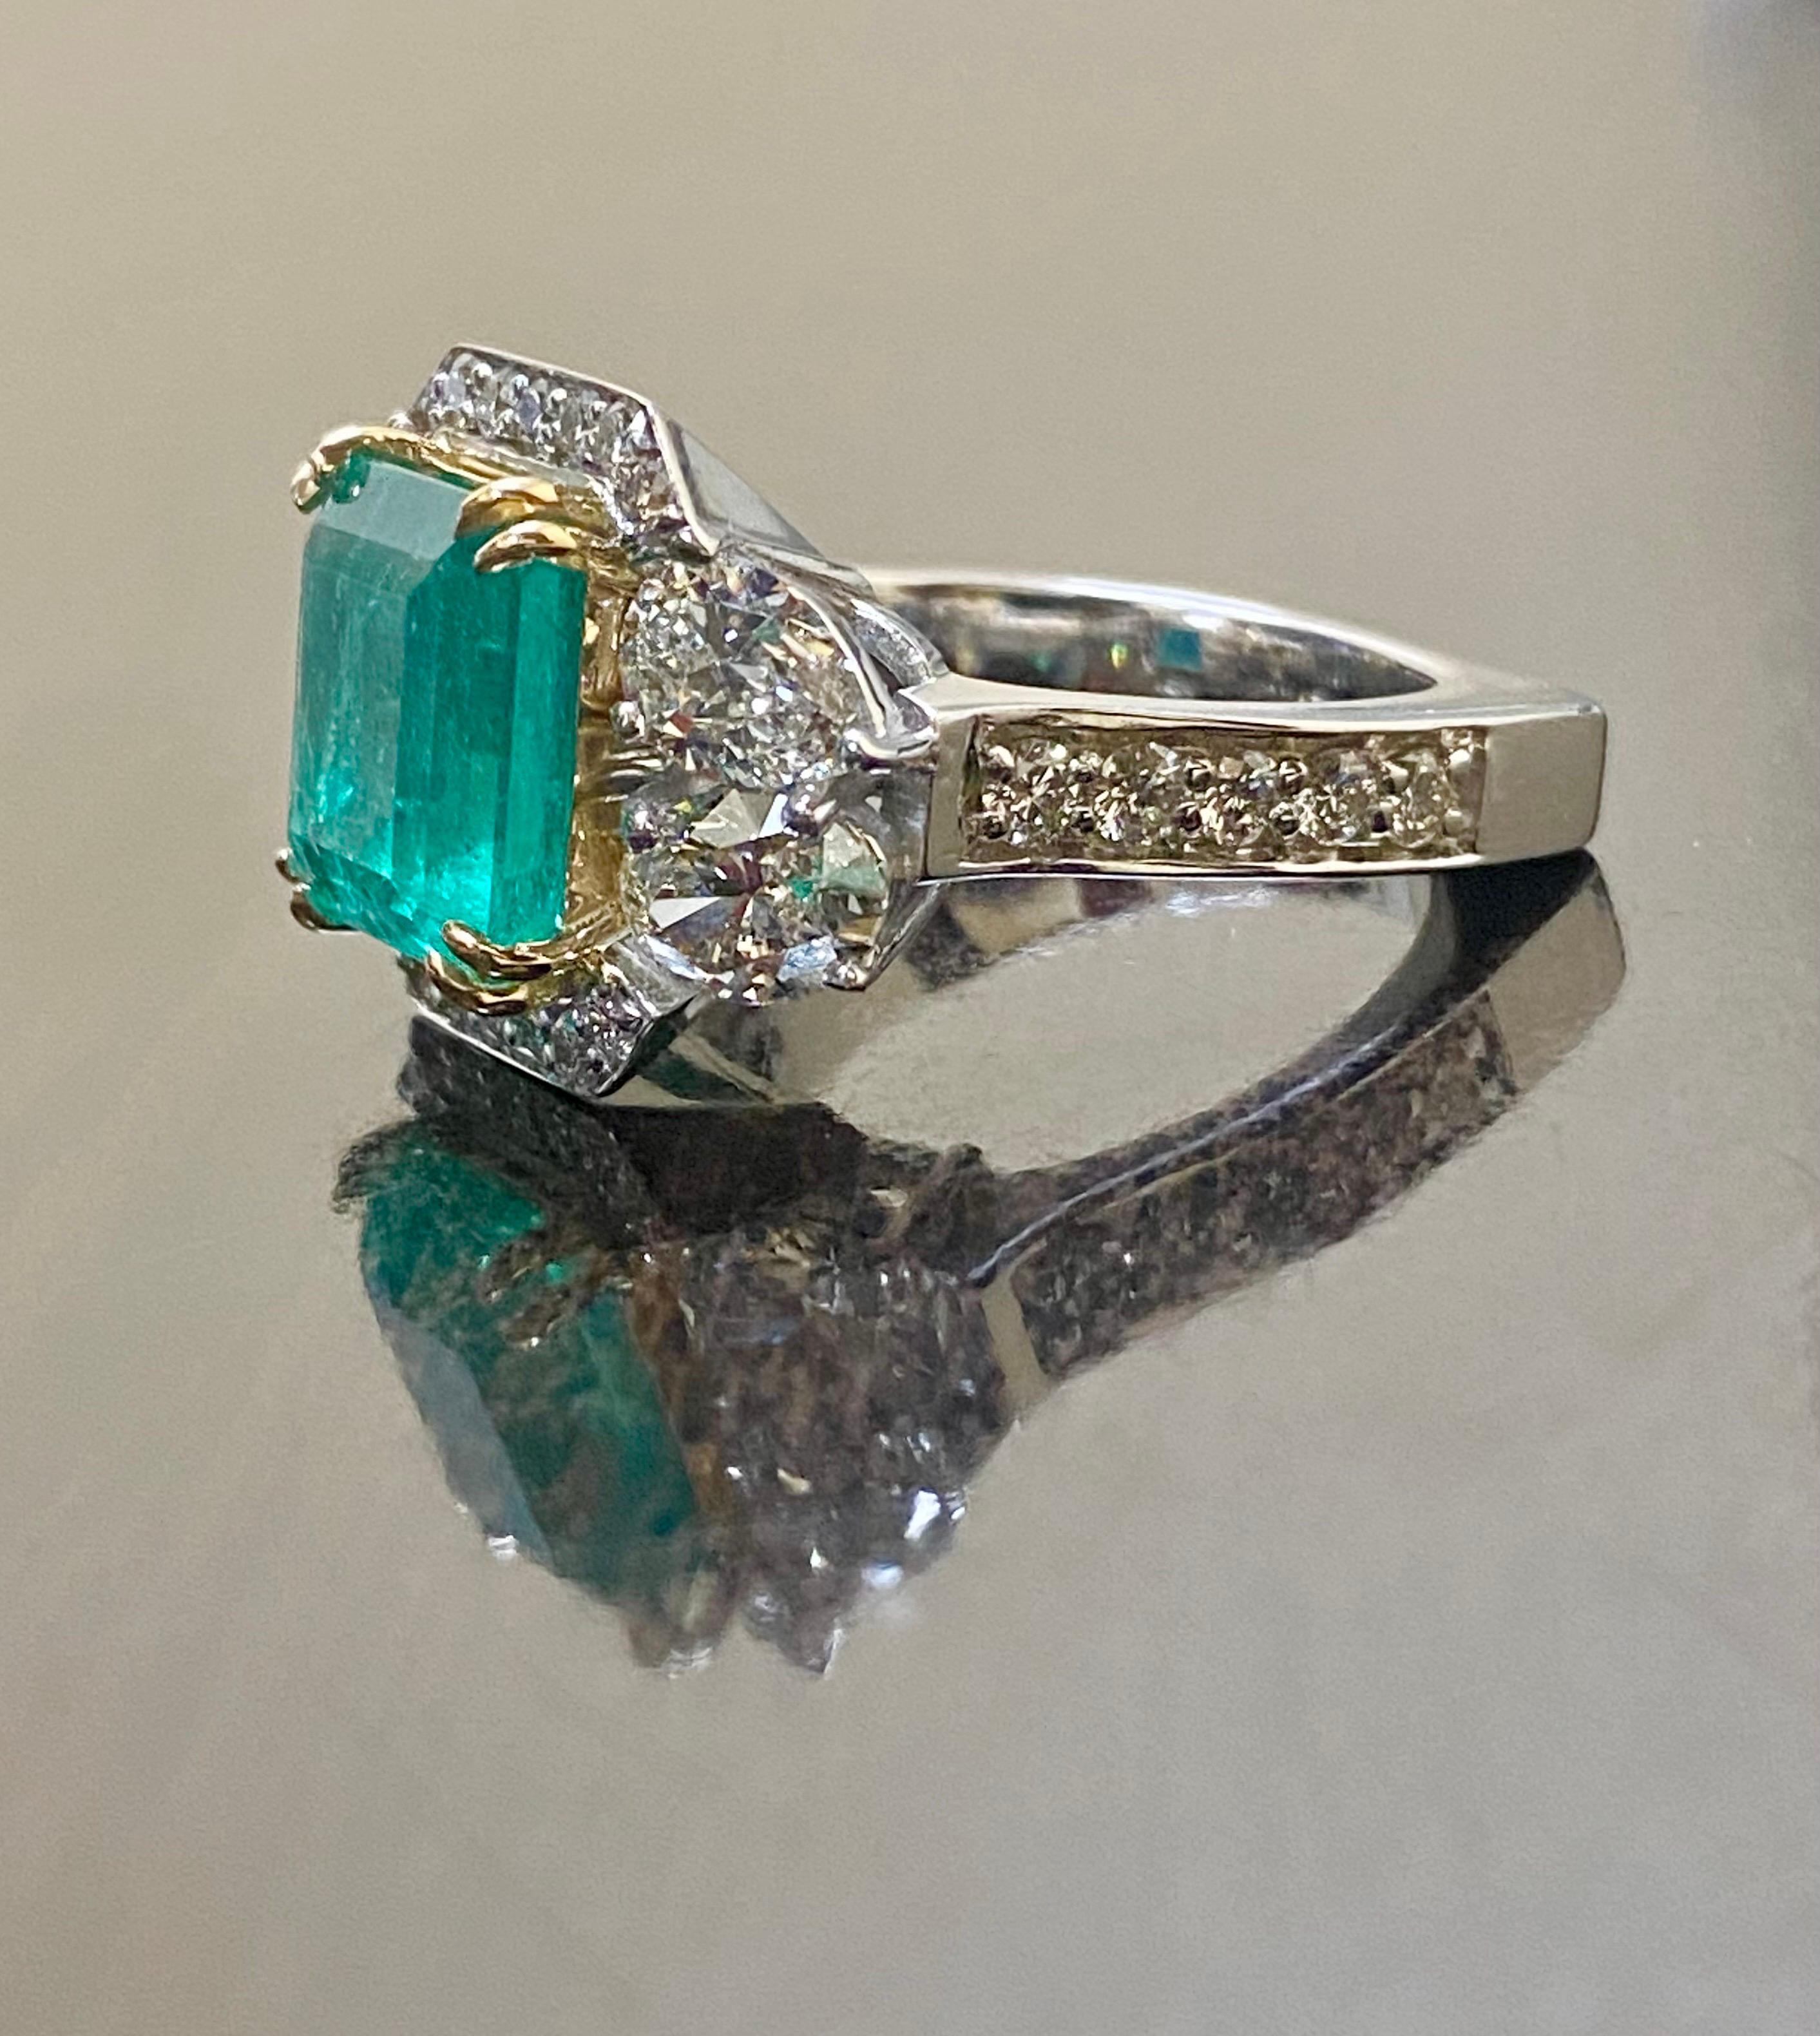 18K White Gold GIA Certified 4.87 Carat Colombian Emerald Diamond Ring For Sale 2